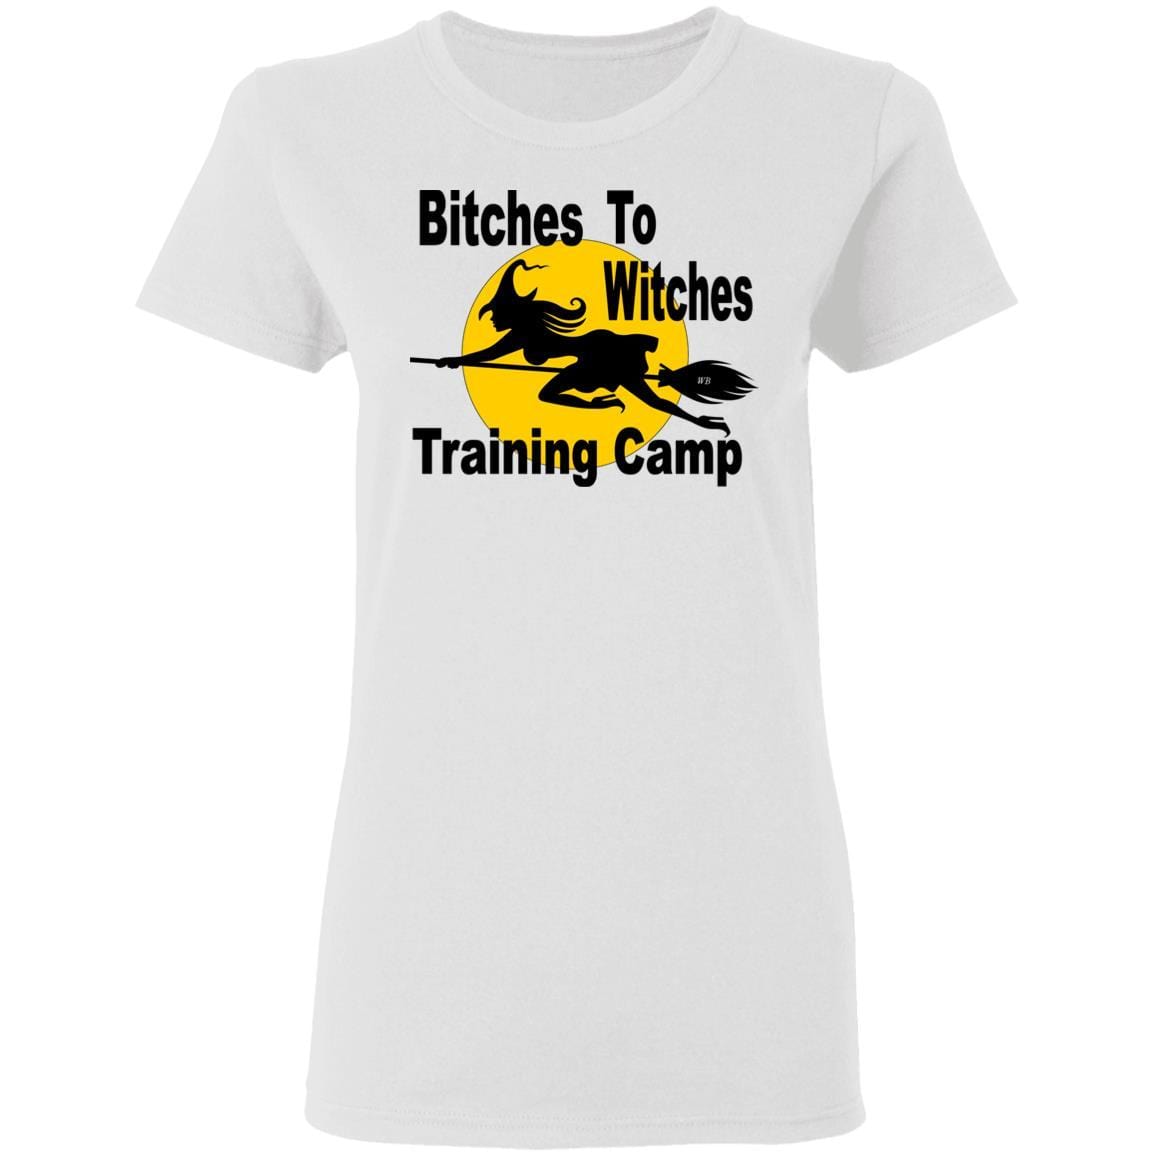 T-Shirts White / S WineyBitches.Co "Bitches To Witches Training Camp" Halloween Ladies' 5.3 oz. T-Shirt WineyBitchesCo